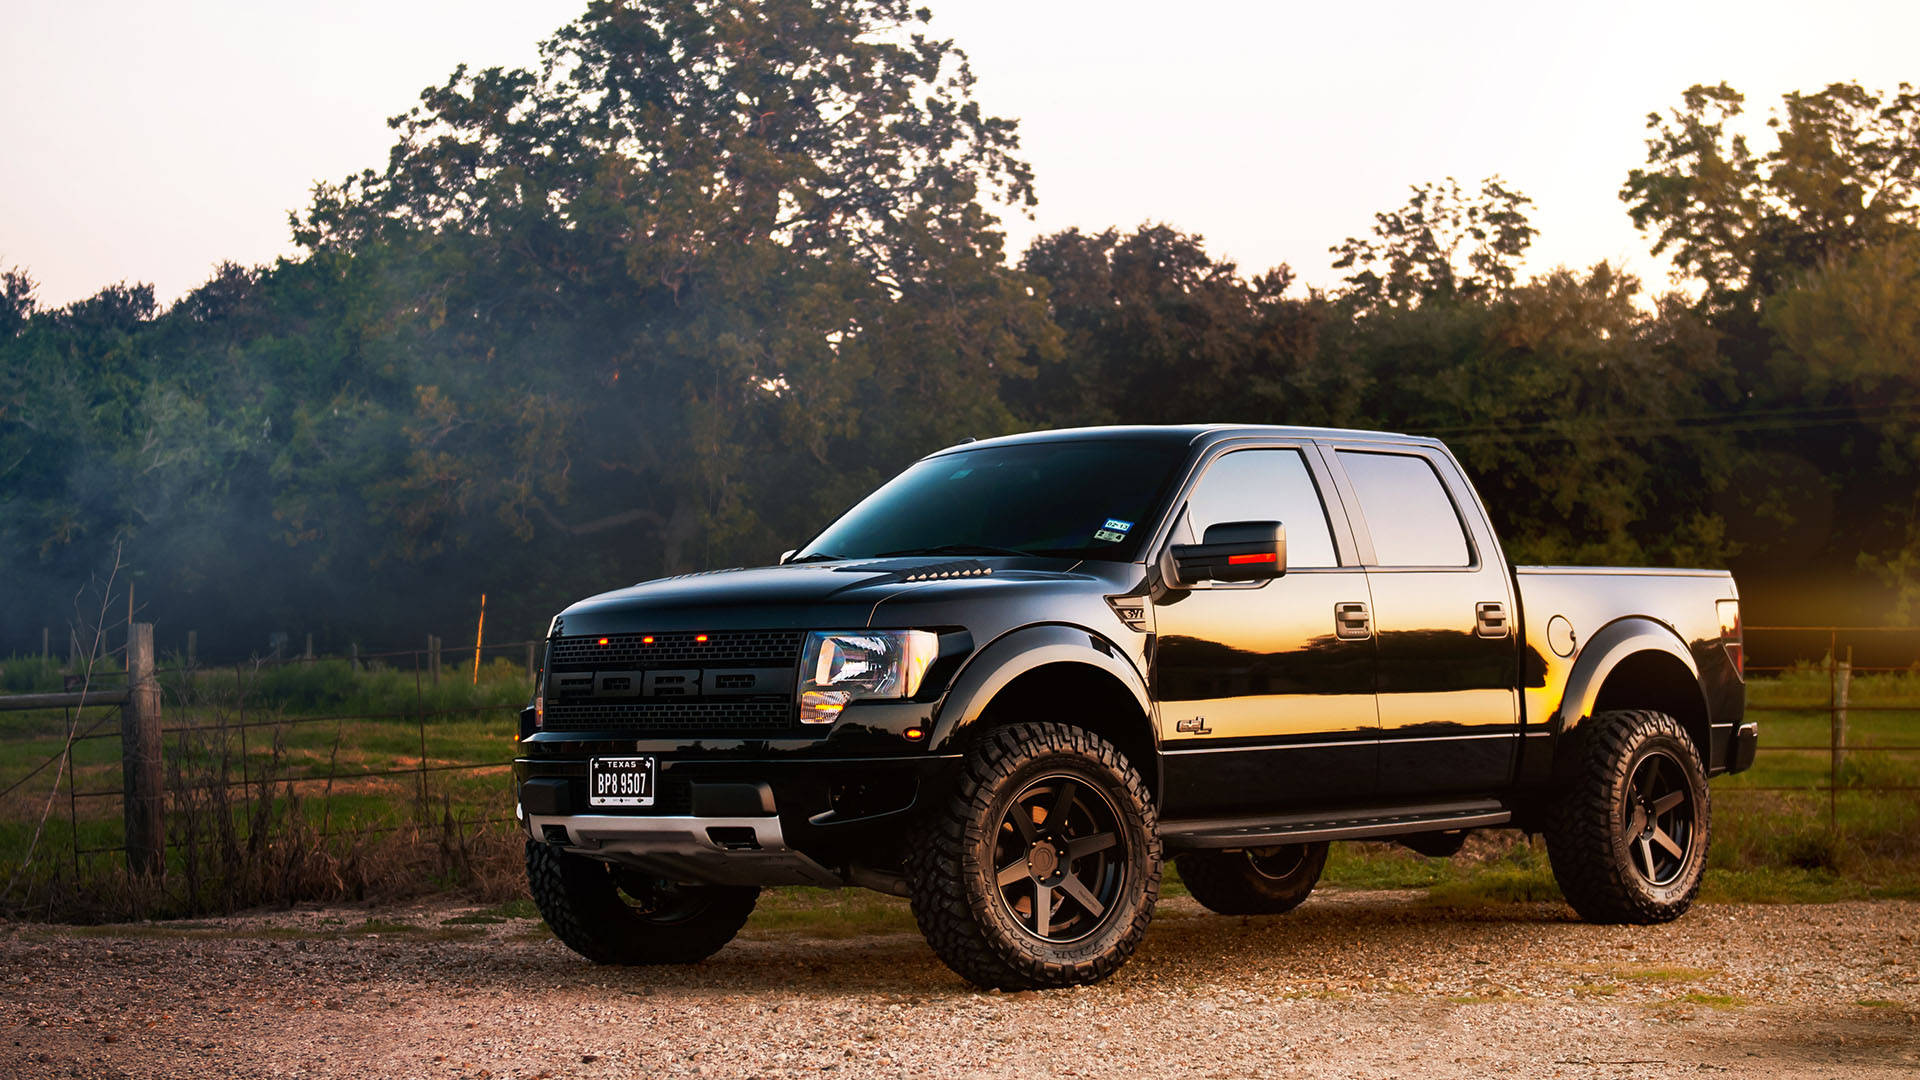 Ford Raptor In Shiny Black Paint Background